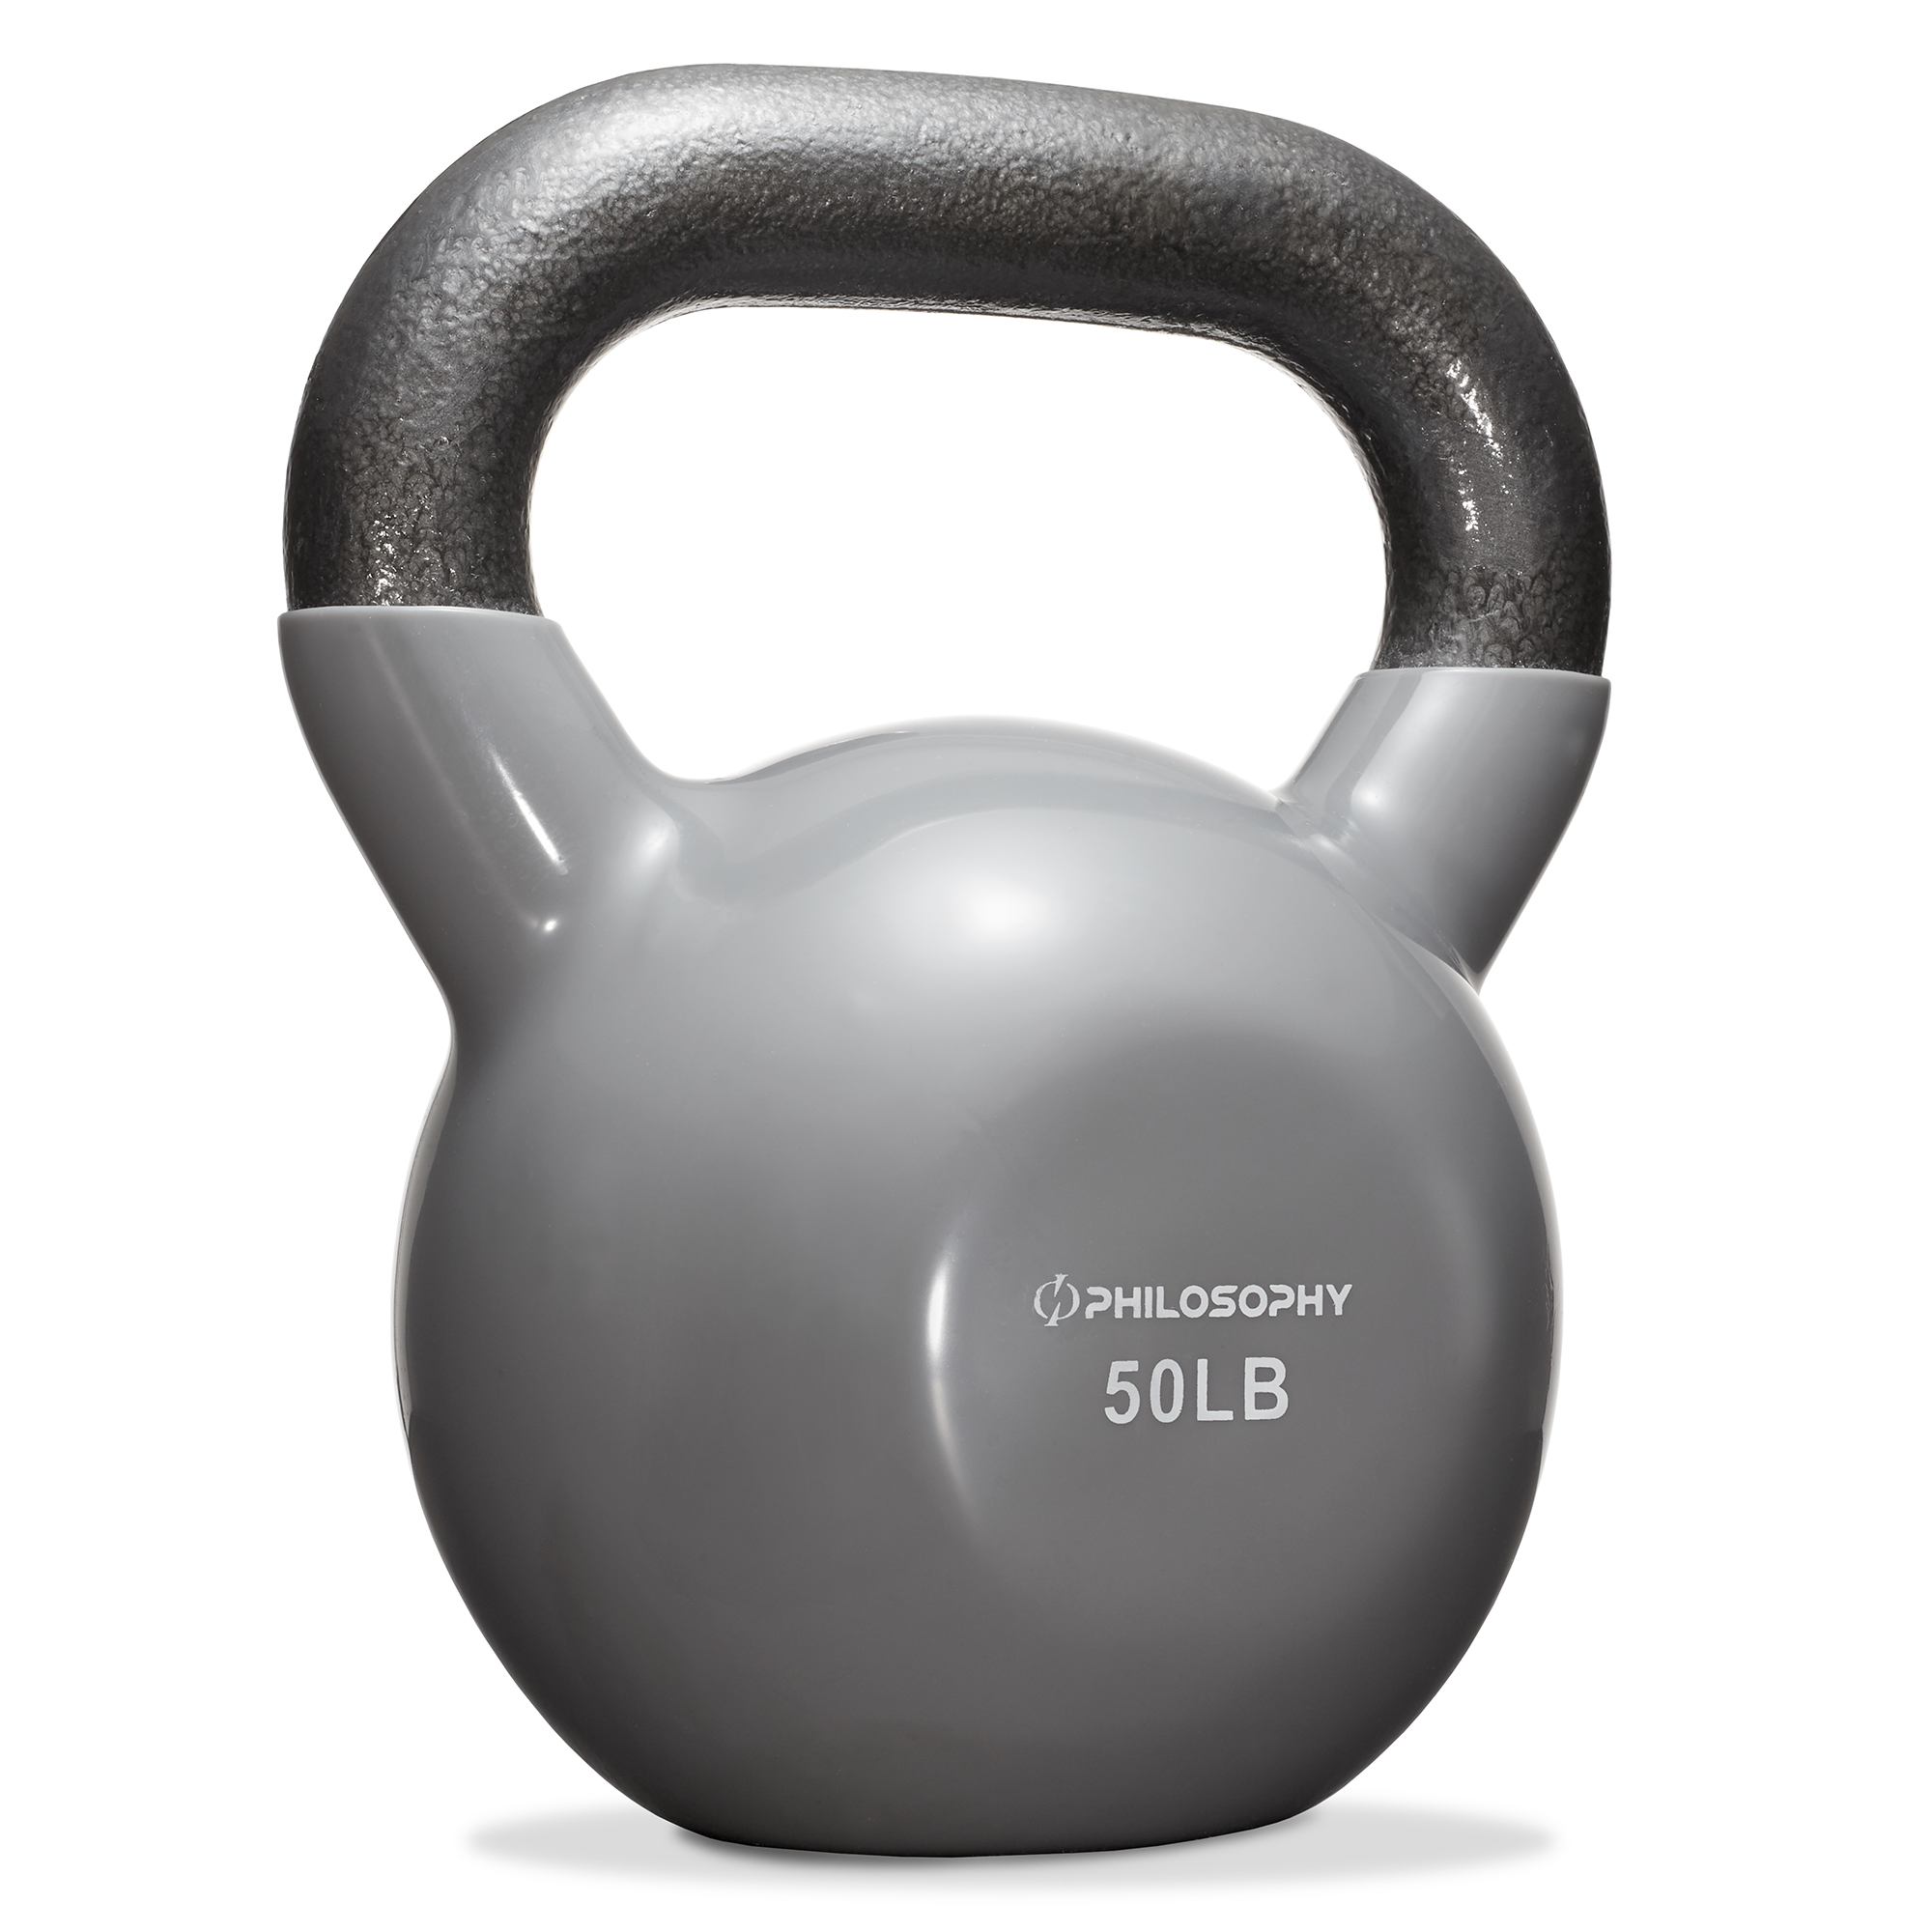 Philosophy Gym 50 lb Vinyl Coated Cast Iron Kettlebell, 50 Pound Weight